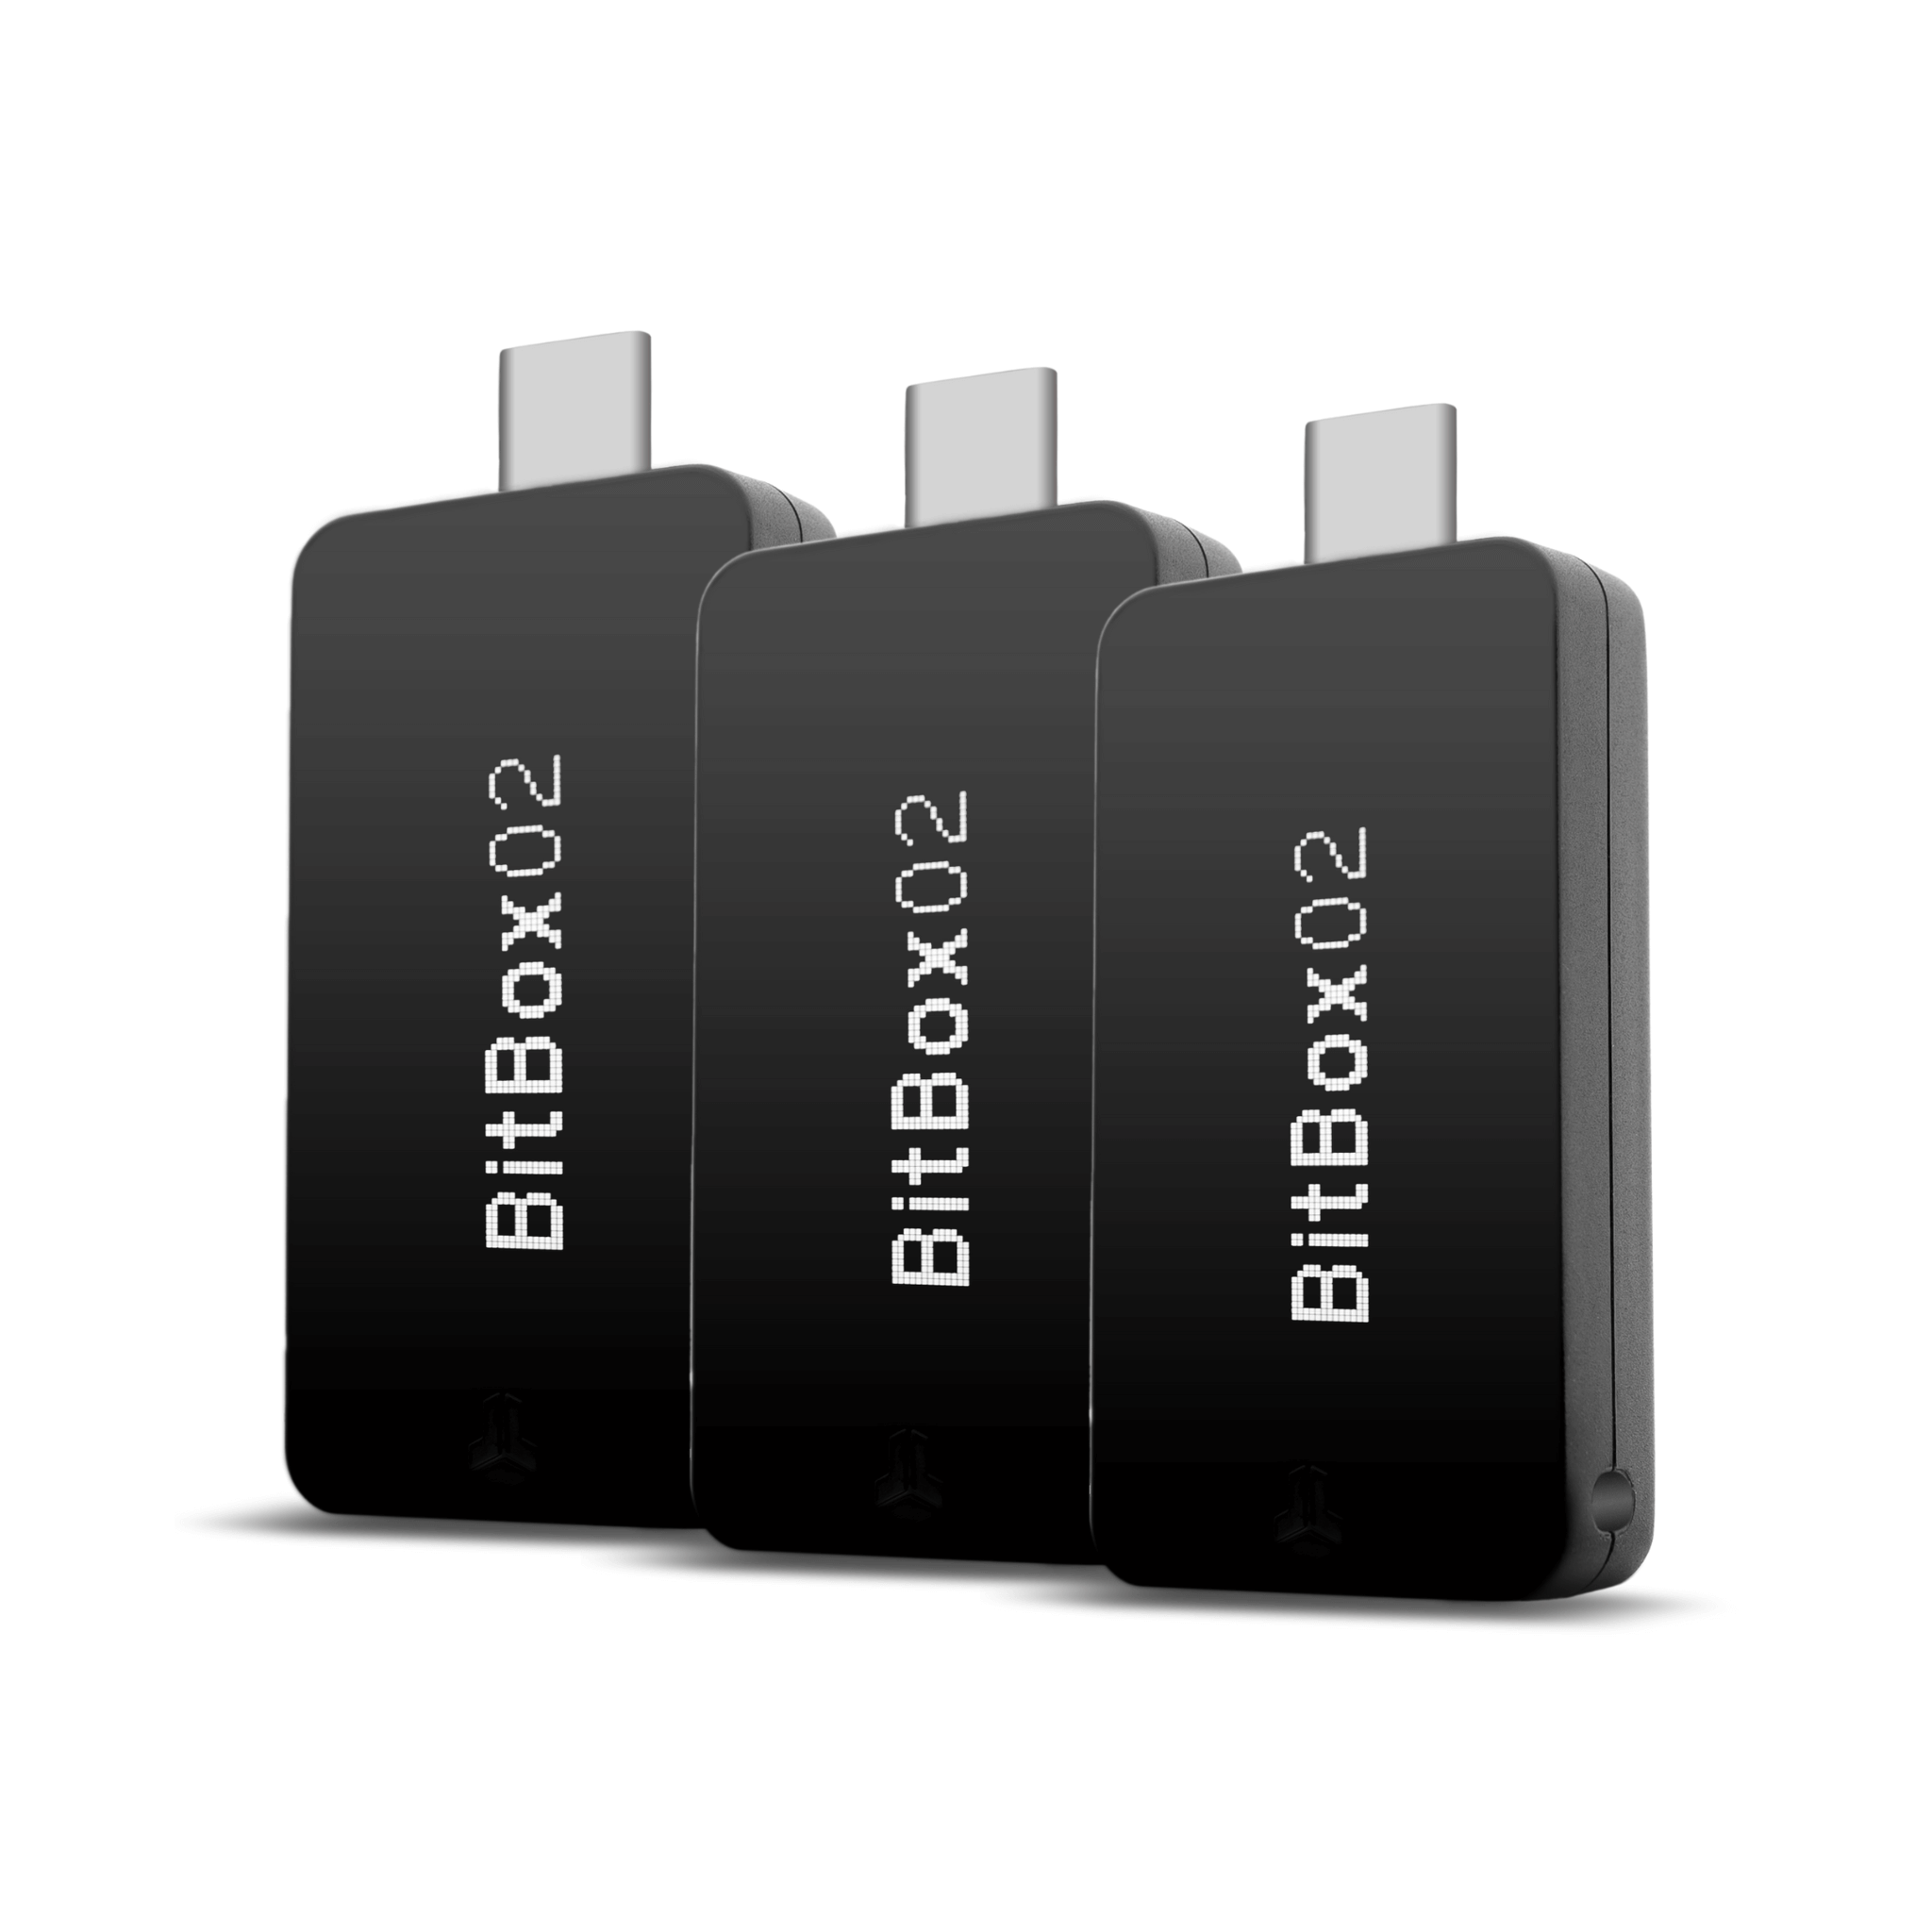 BitBox02 Multi Edition Pack of 3 Cryptocurrency Hardware Wallets